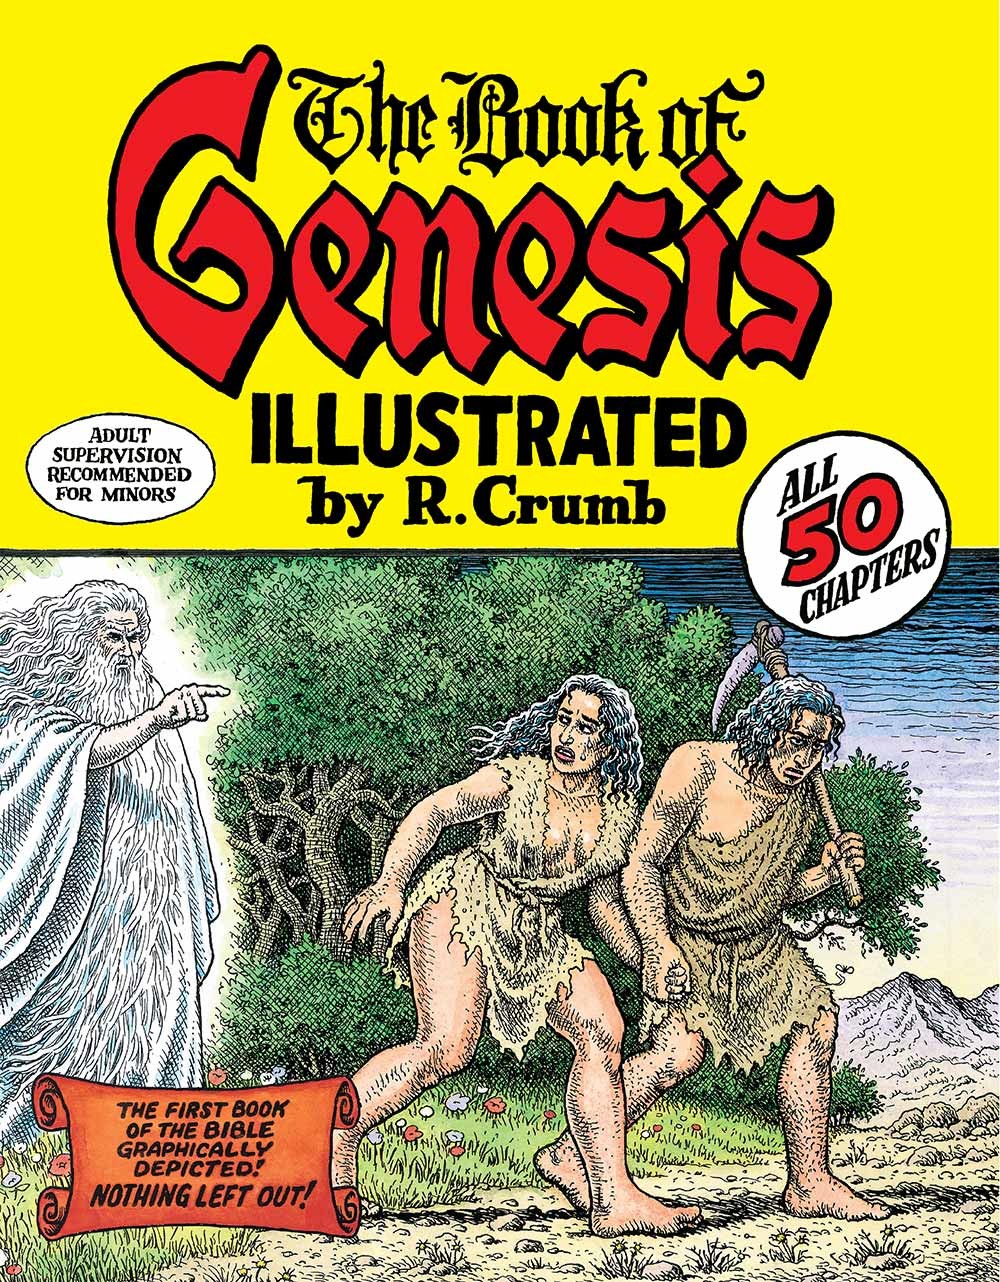 The Book Of Genesis Illustrated by R. Crumb